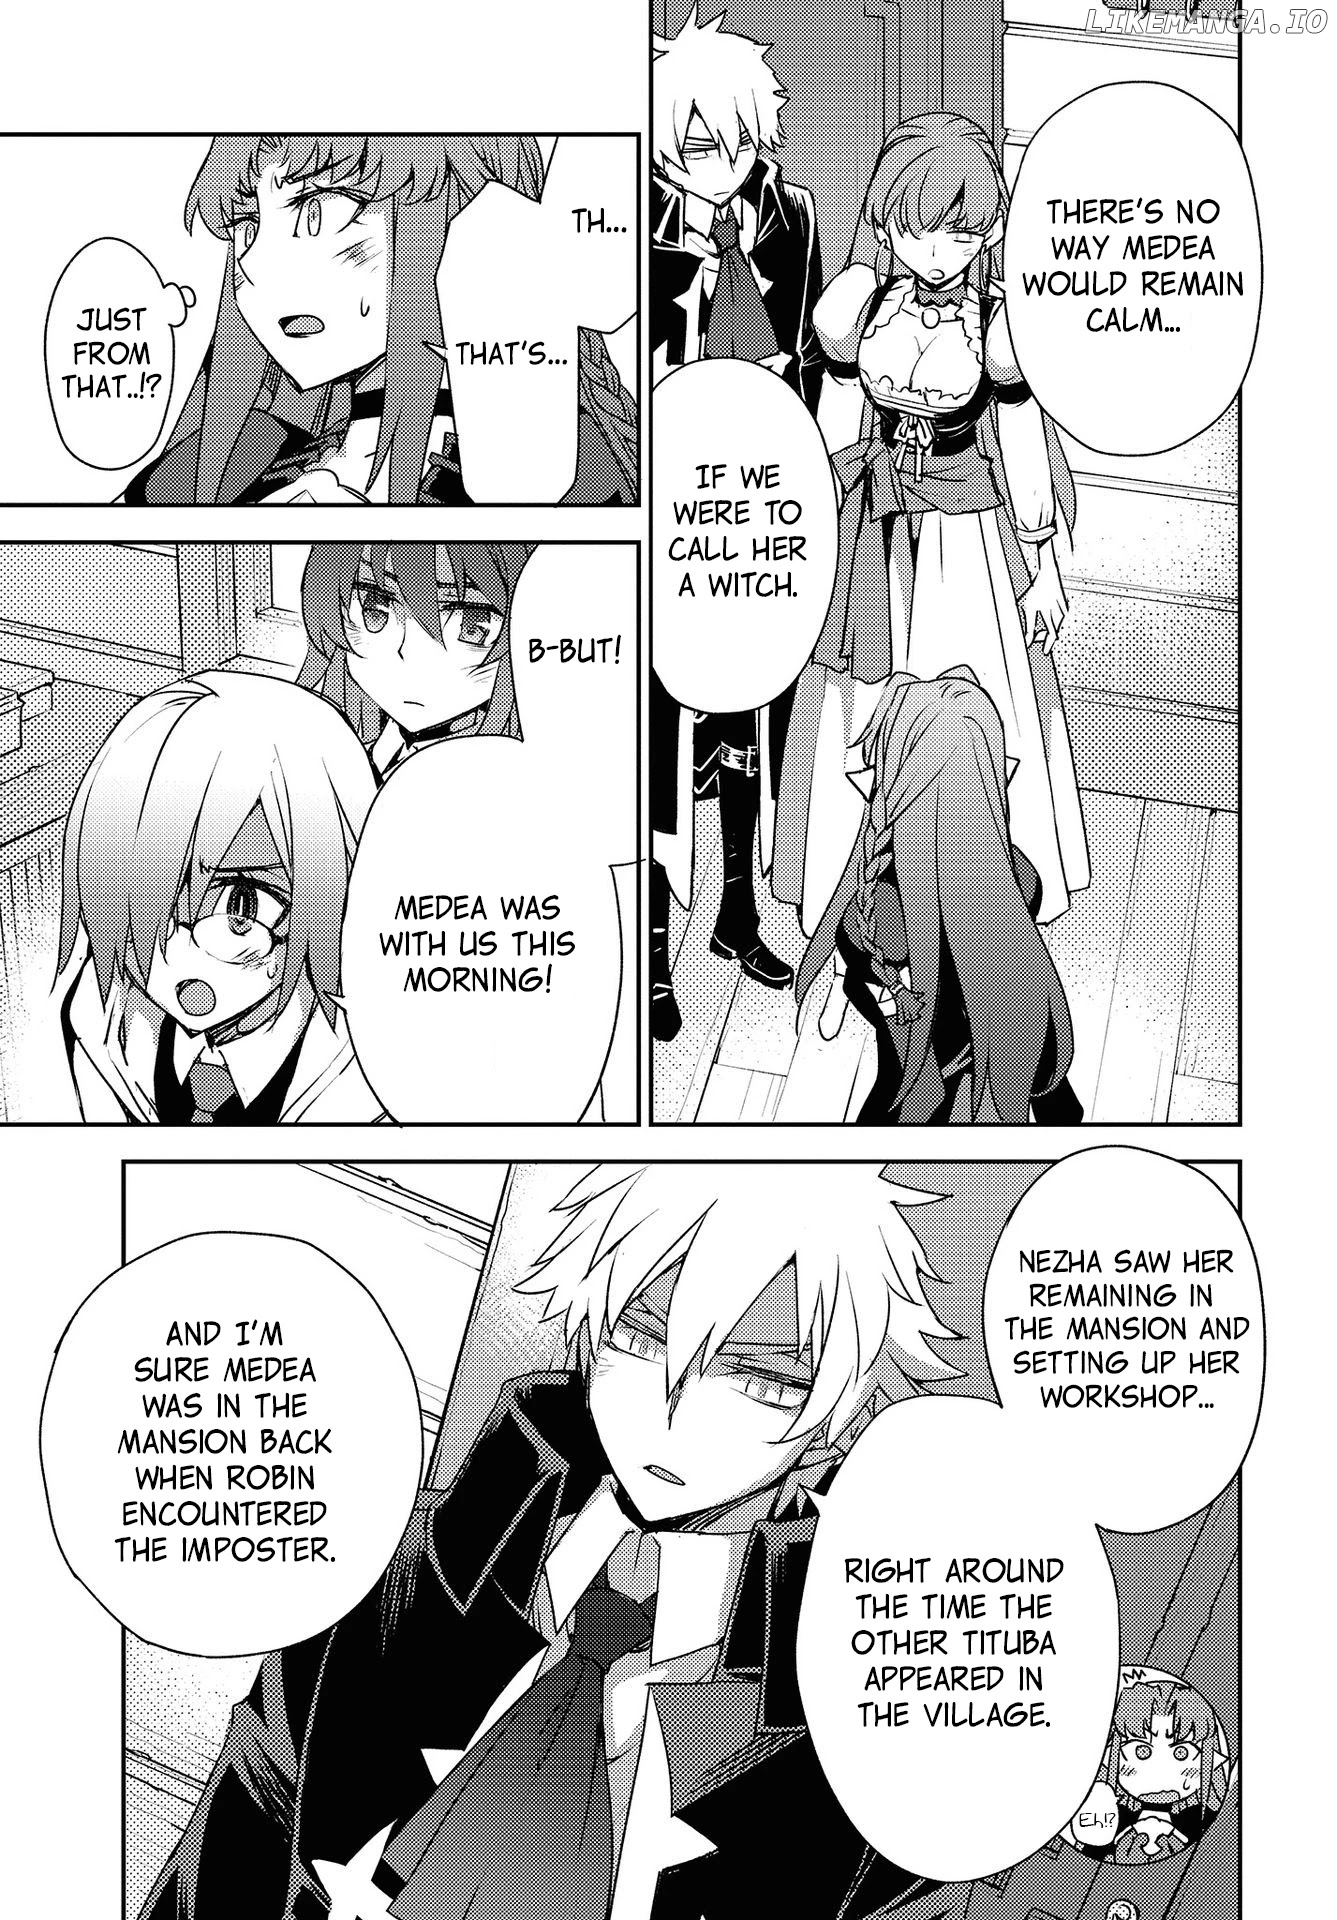 Fate/Grand Order: Epic of Remnant - Subspecies Singularity IV: Taboo Advent Salem: Salem of Heresy chapter 11 - page 3